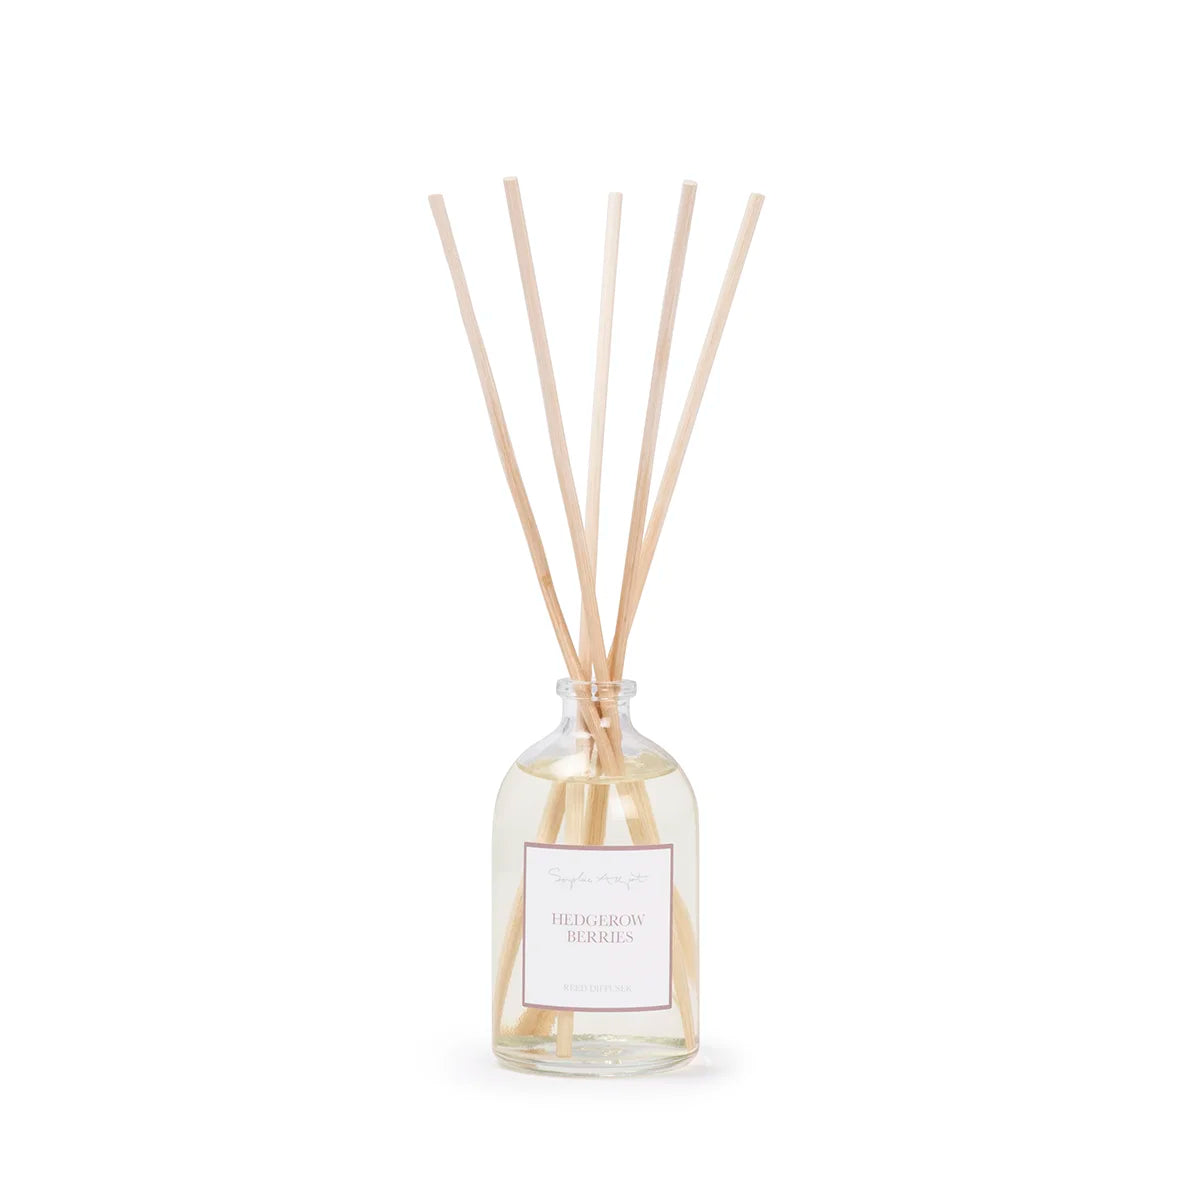 Hedgerow Berries Diffuser by Sophie Allport